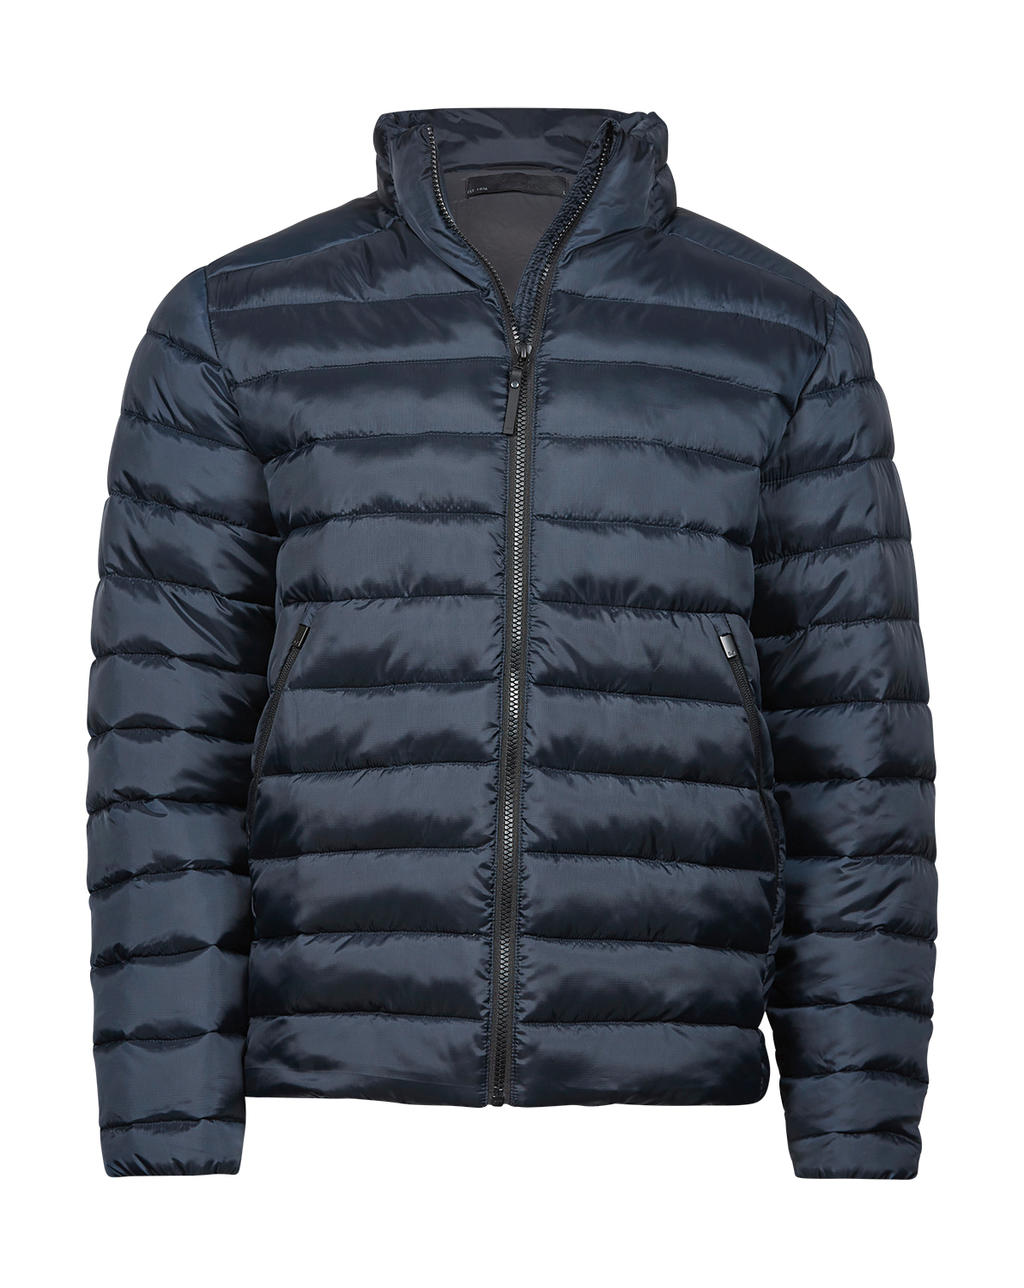  Lite Jacket in Farbe Navy